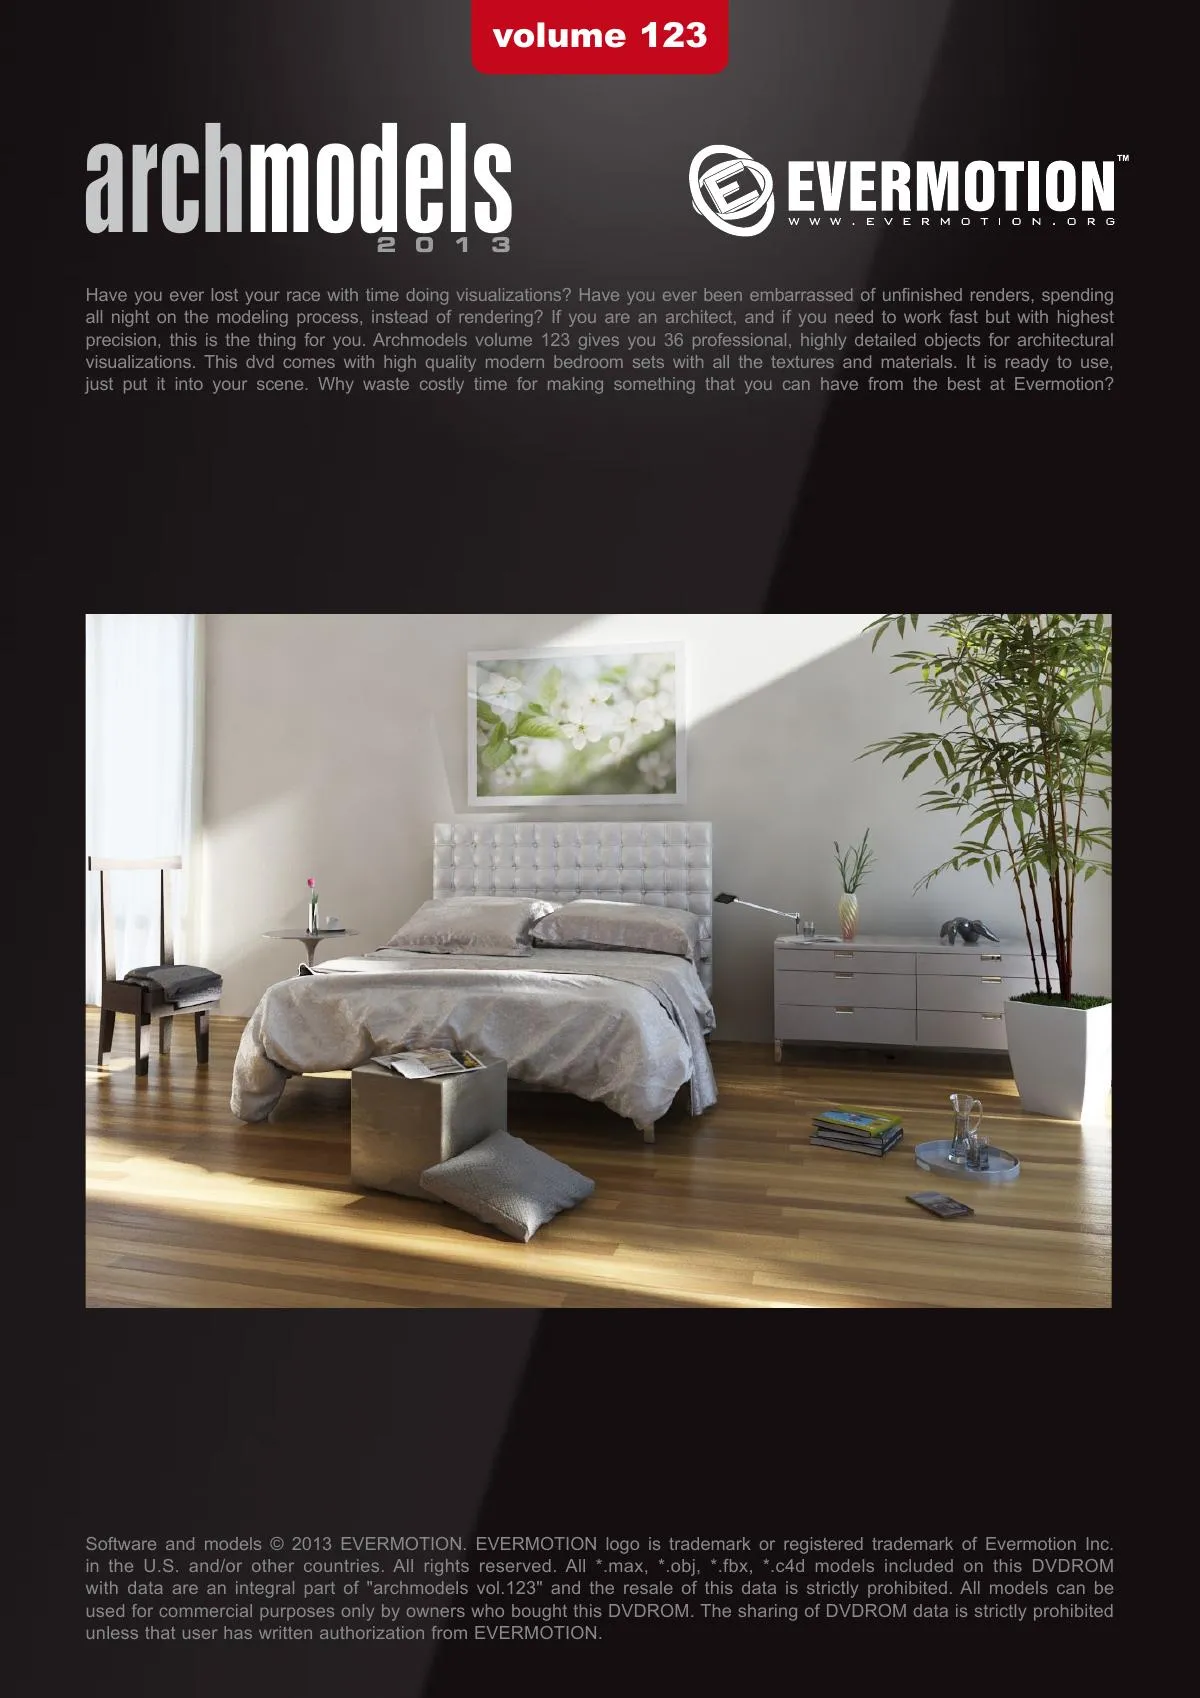 Evermotion Archmodels Vol 123 [bed]